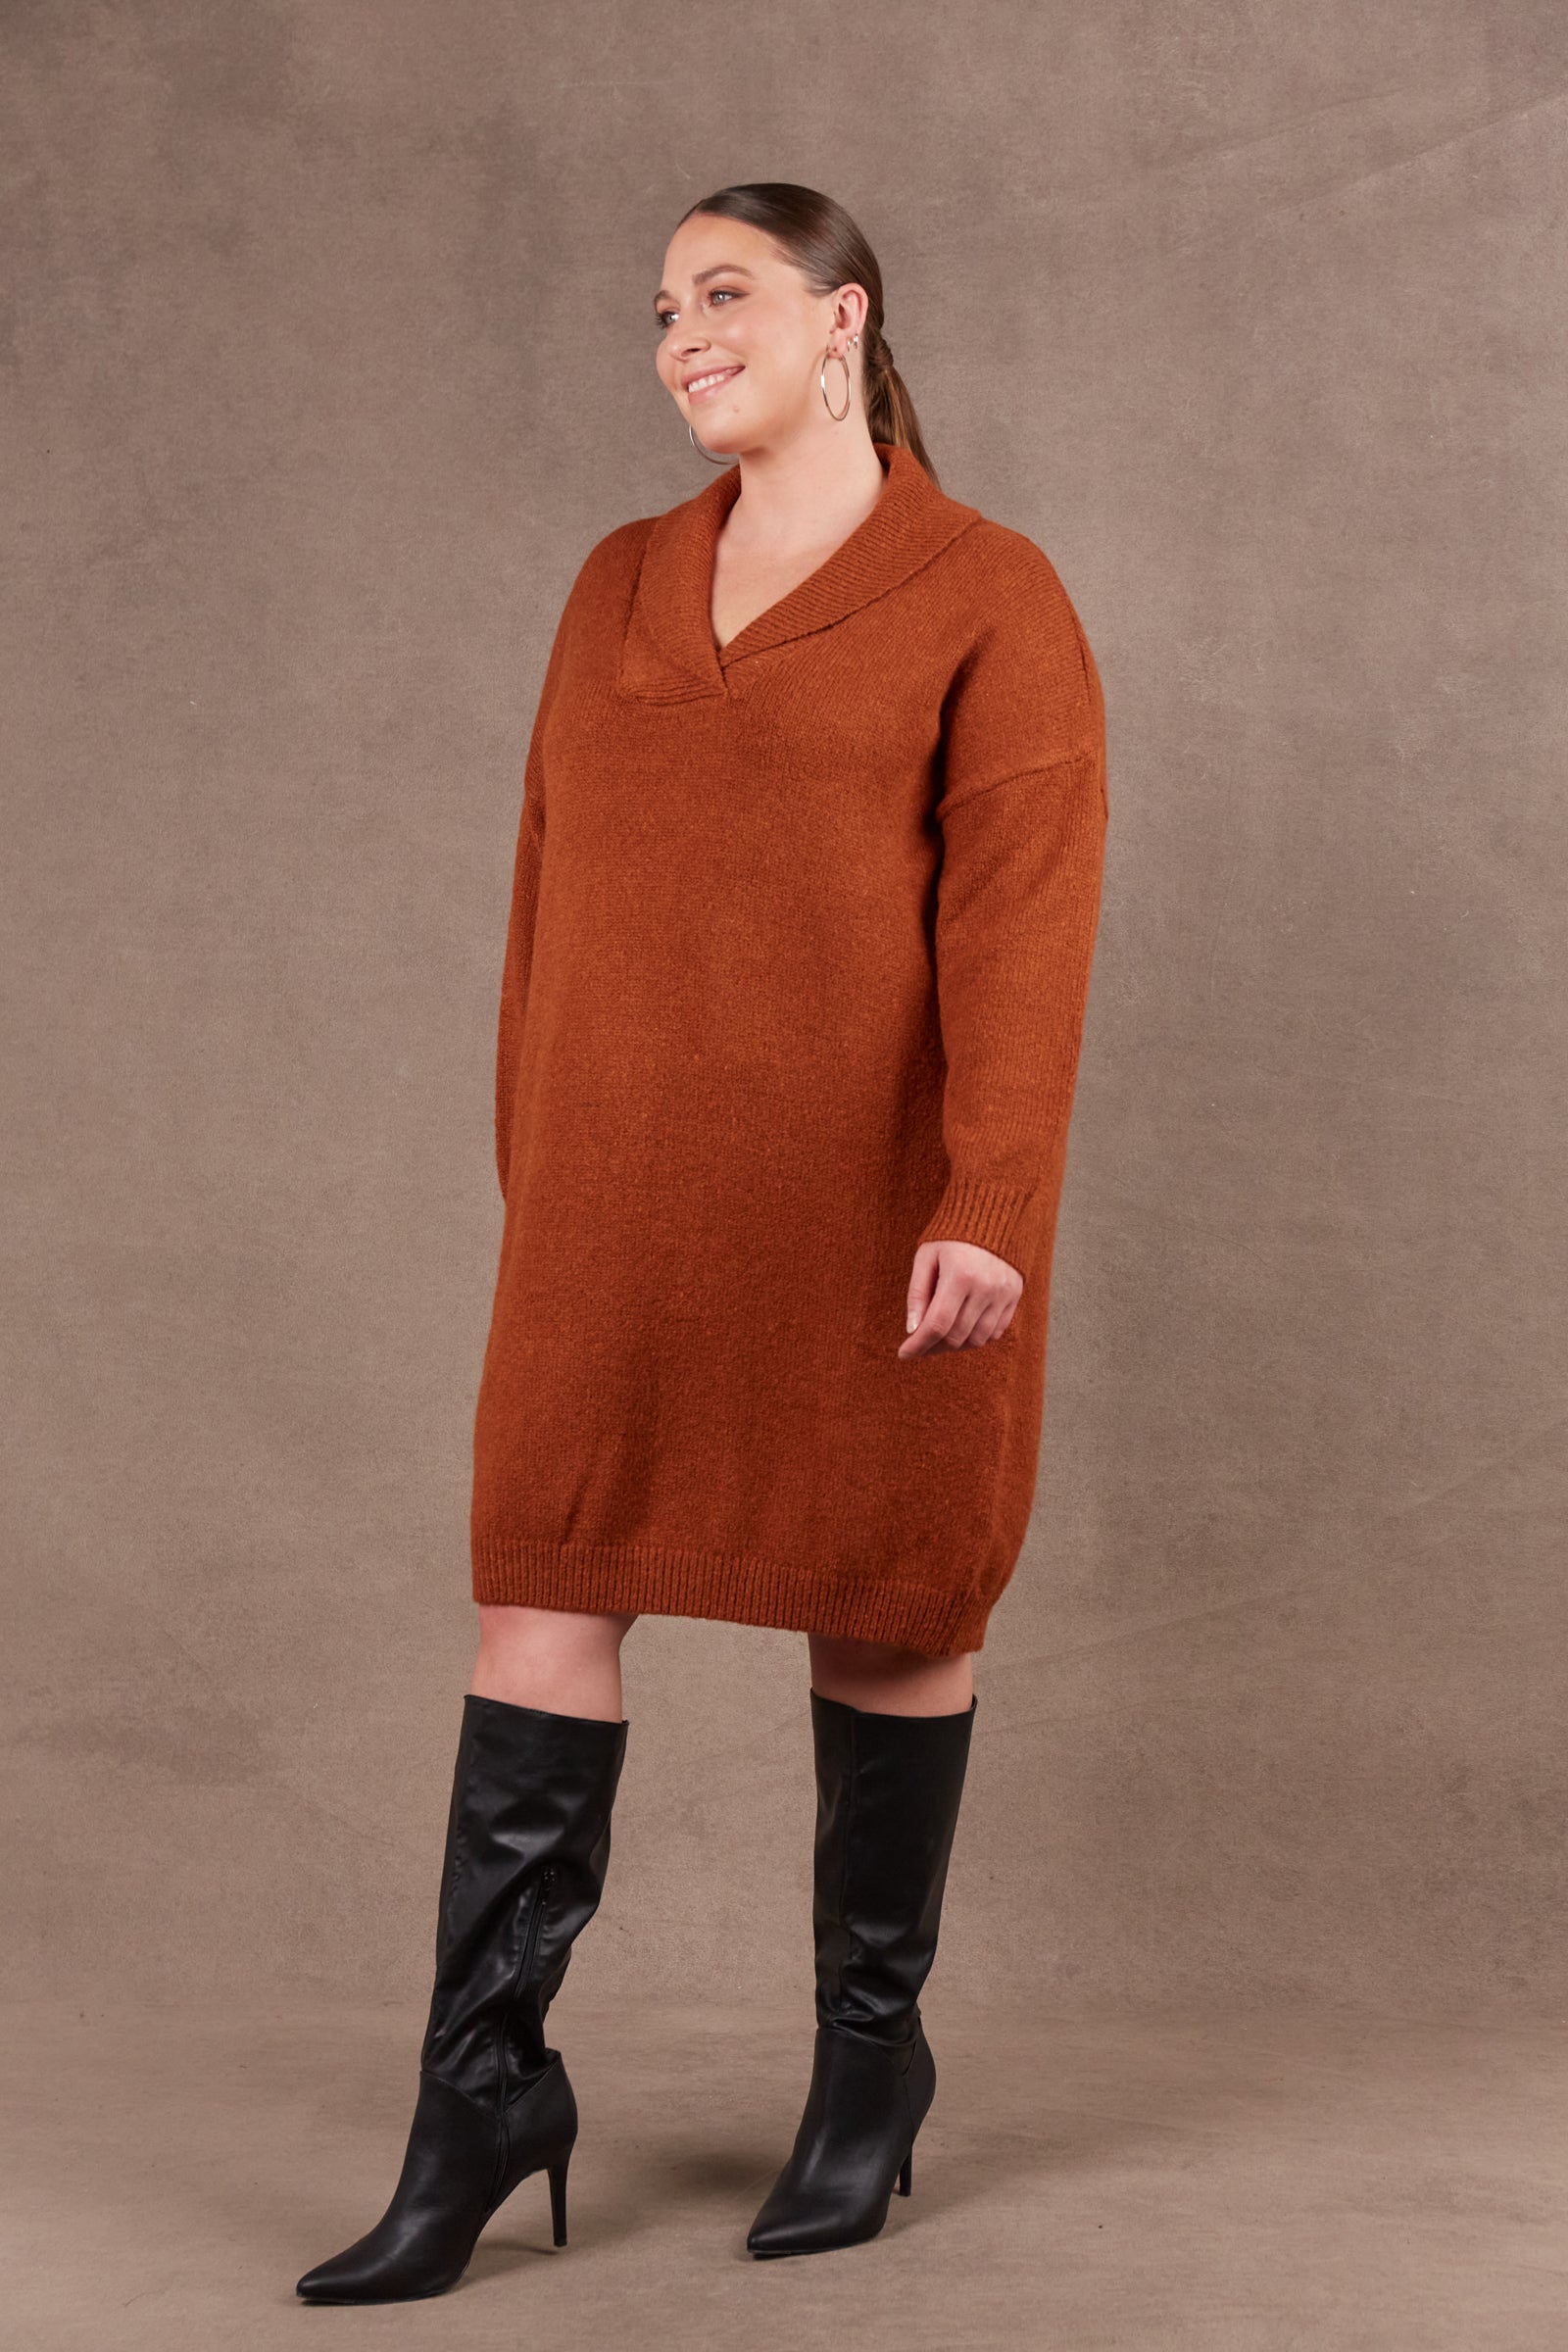 Paarl Top/Dress - Ochre-Tops-Eb & Ive-Onesize-The Bay Room